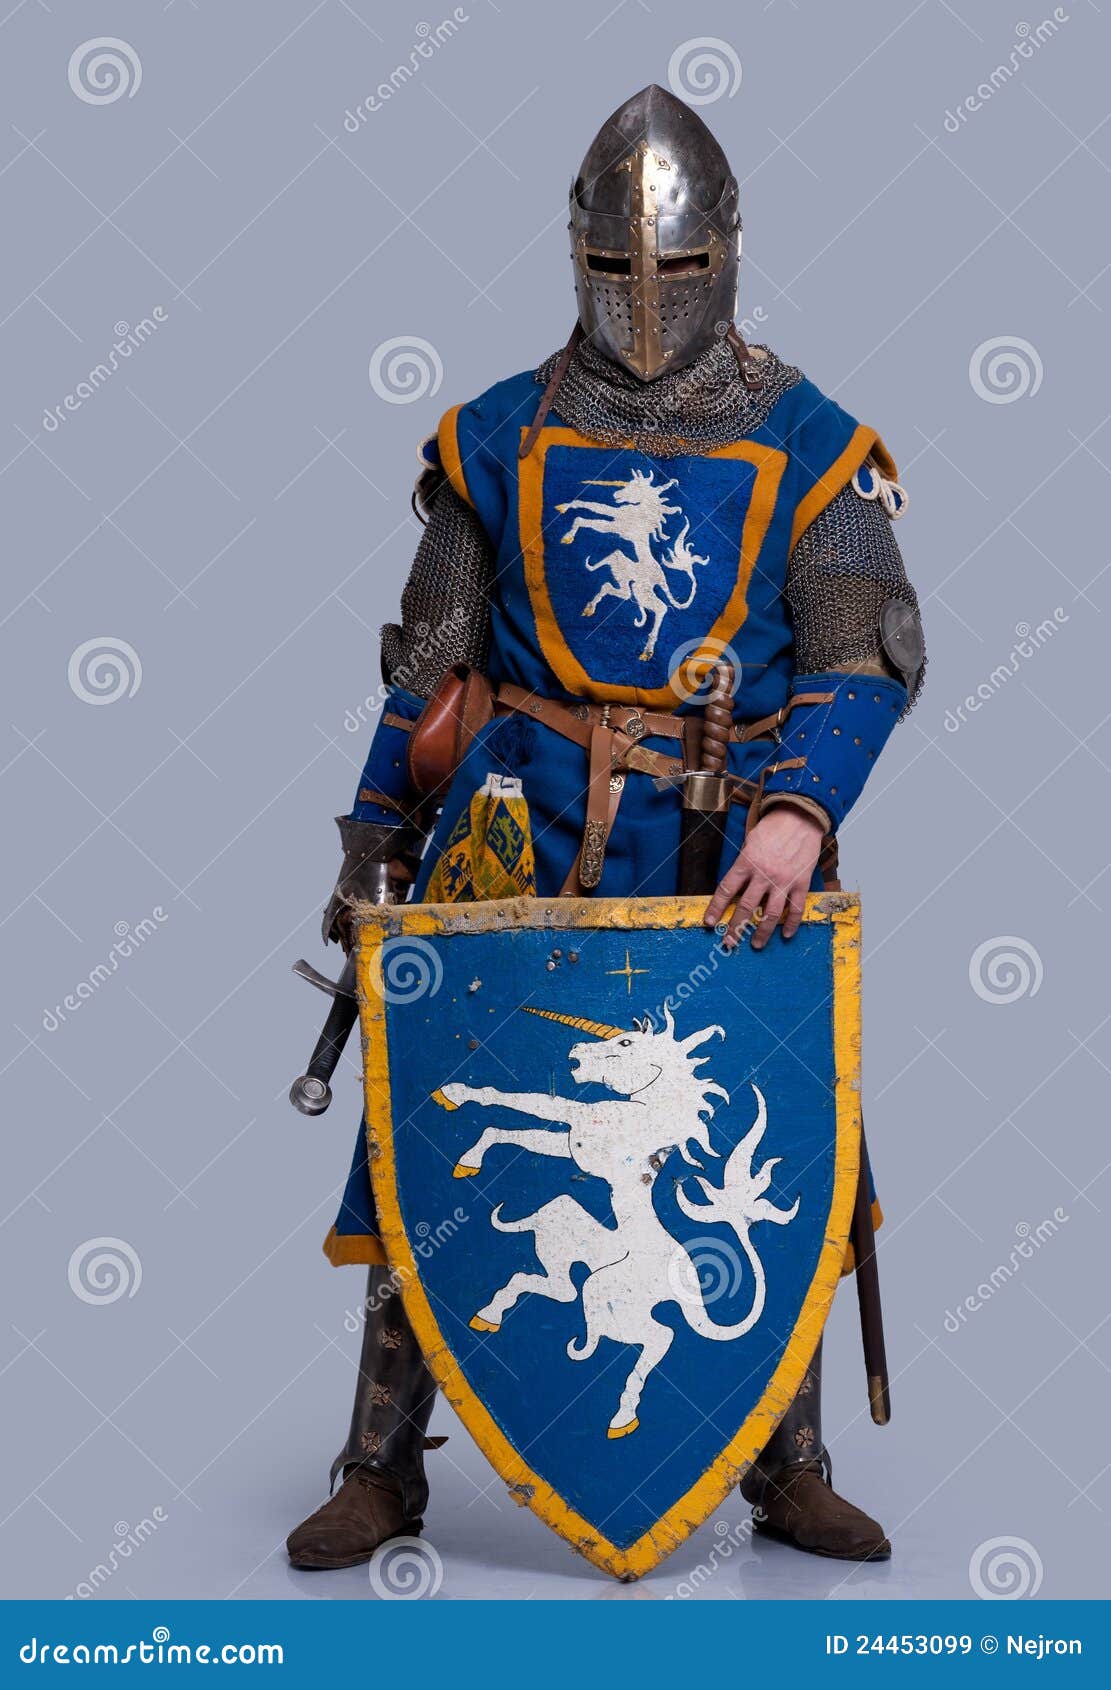 medieval knight with shield in front of him